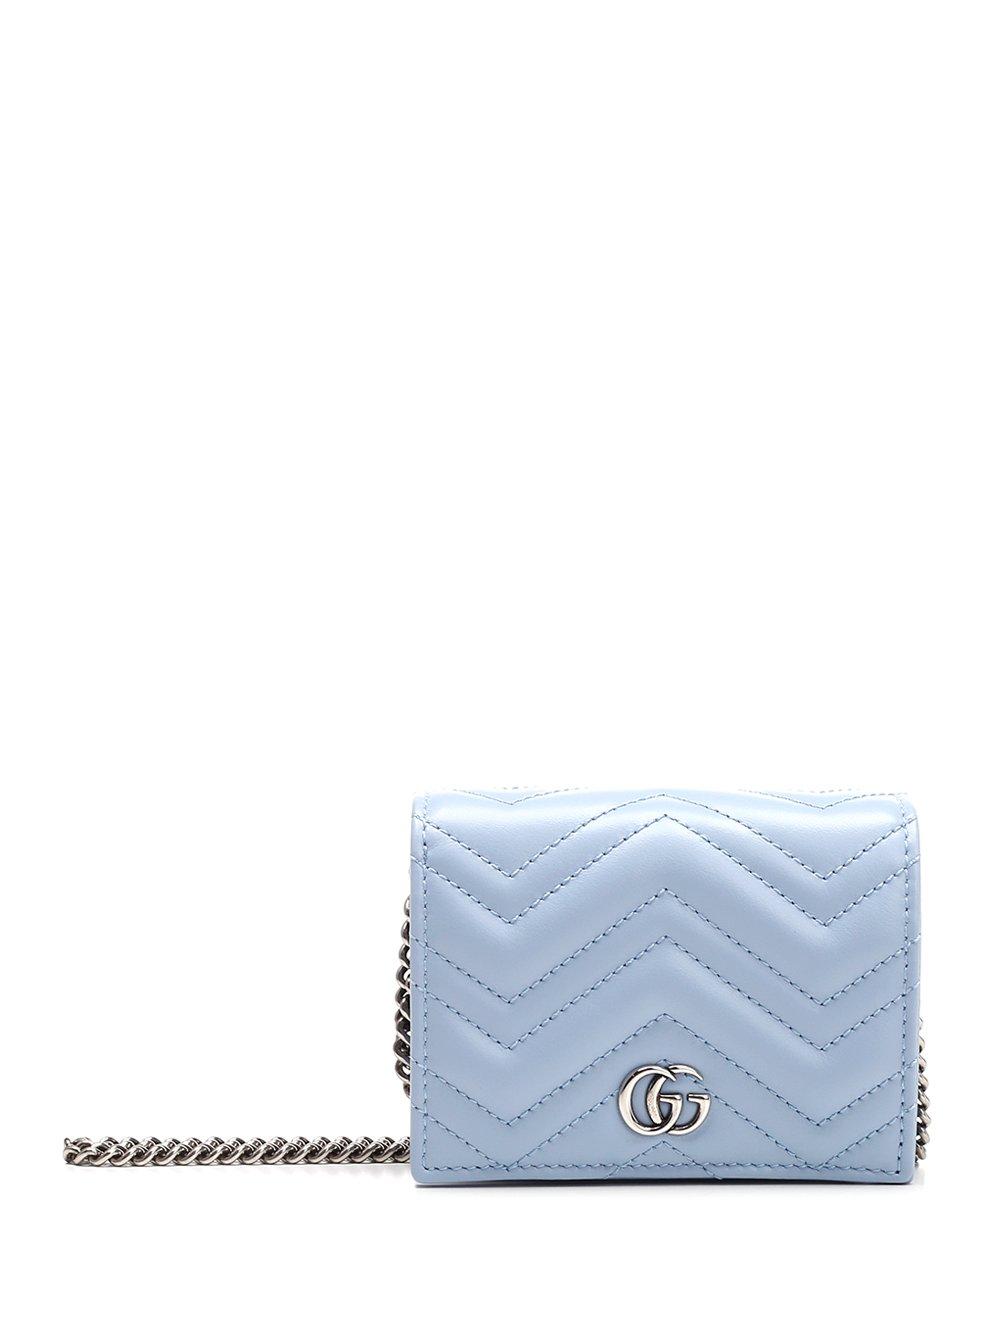 Gucci GG Marmont Chevron Matelasse Leather Card Case Wallet on Chain